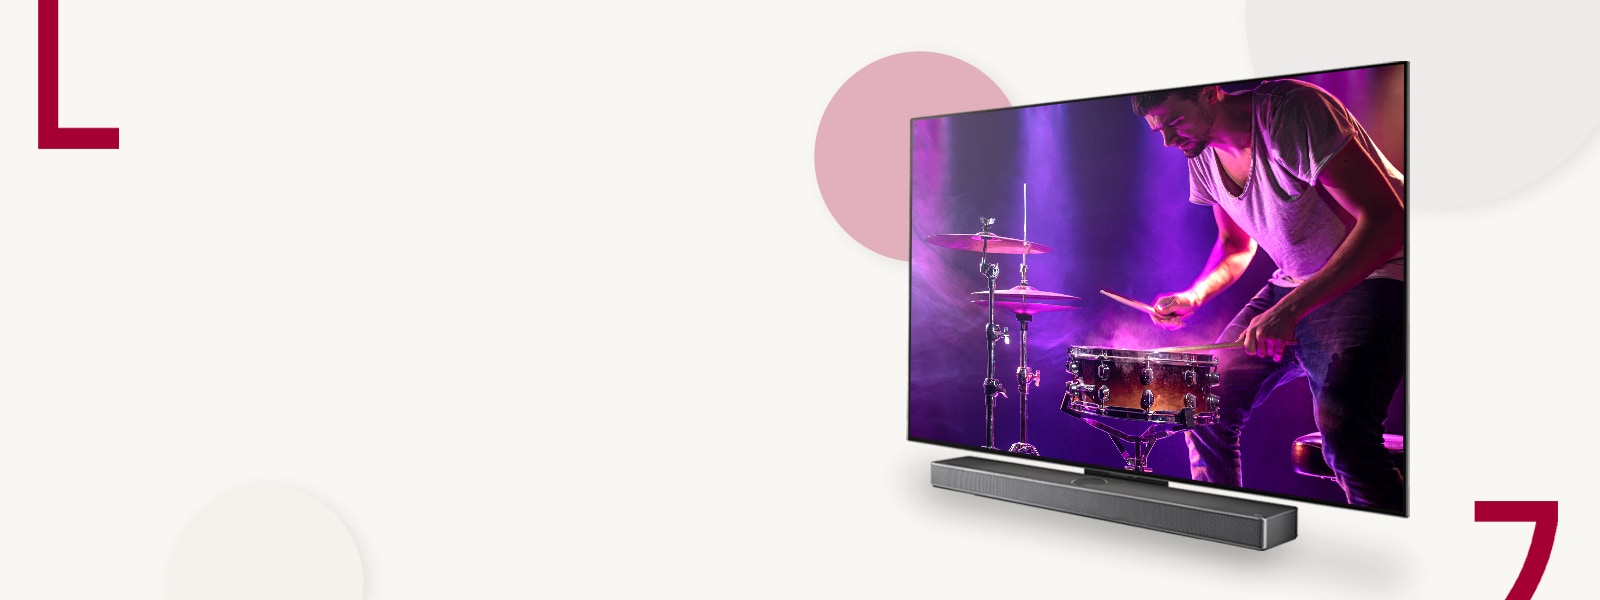 "An image of LG OLED C3 and the Soundbar against  a cream backdrop with colored circles. A man playing the drums is on screen. "